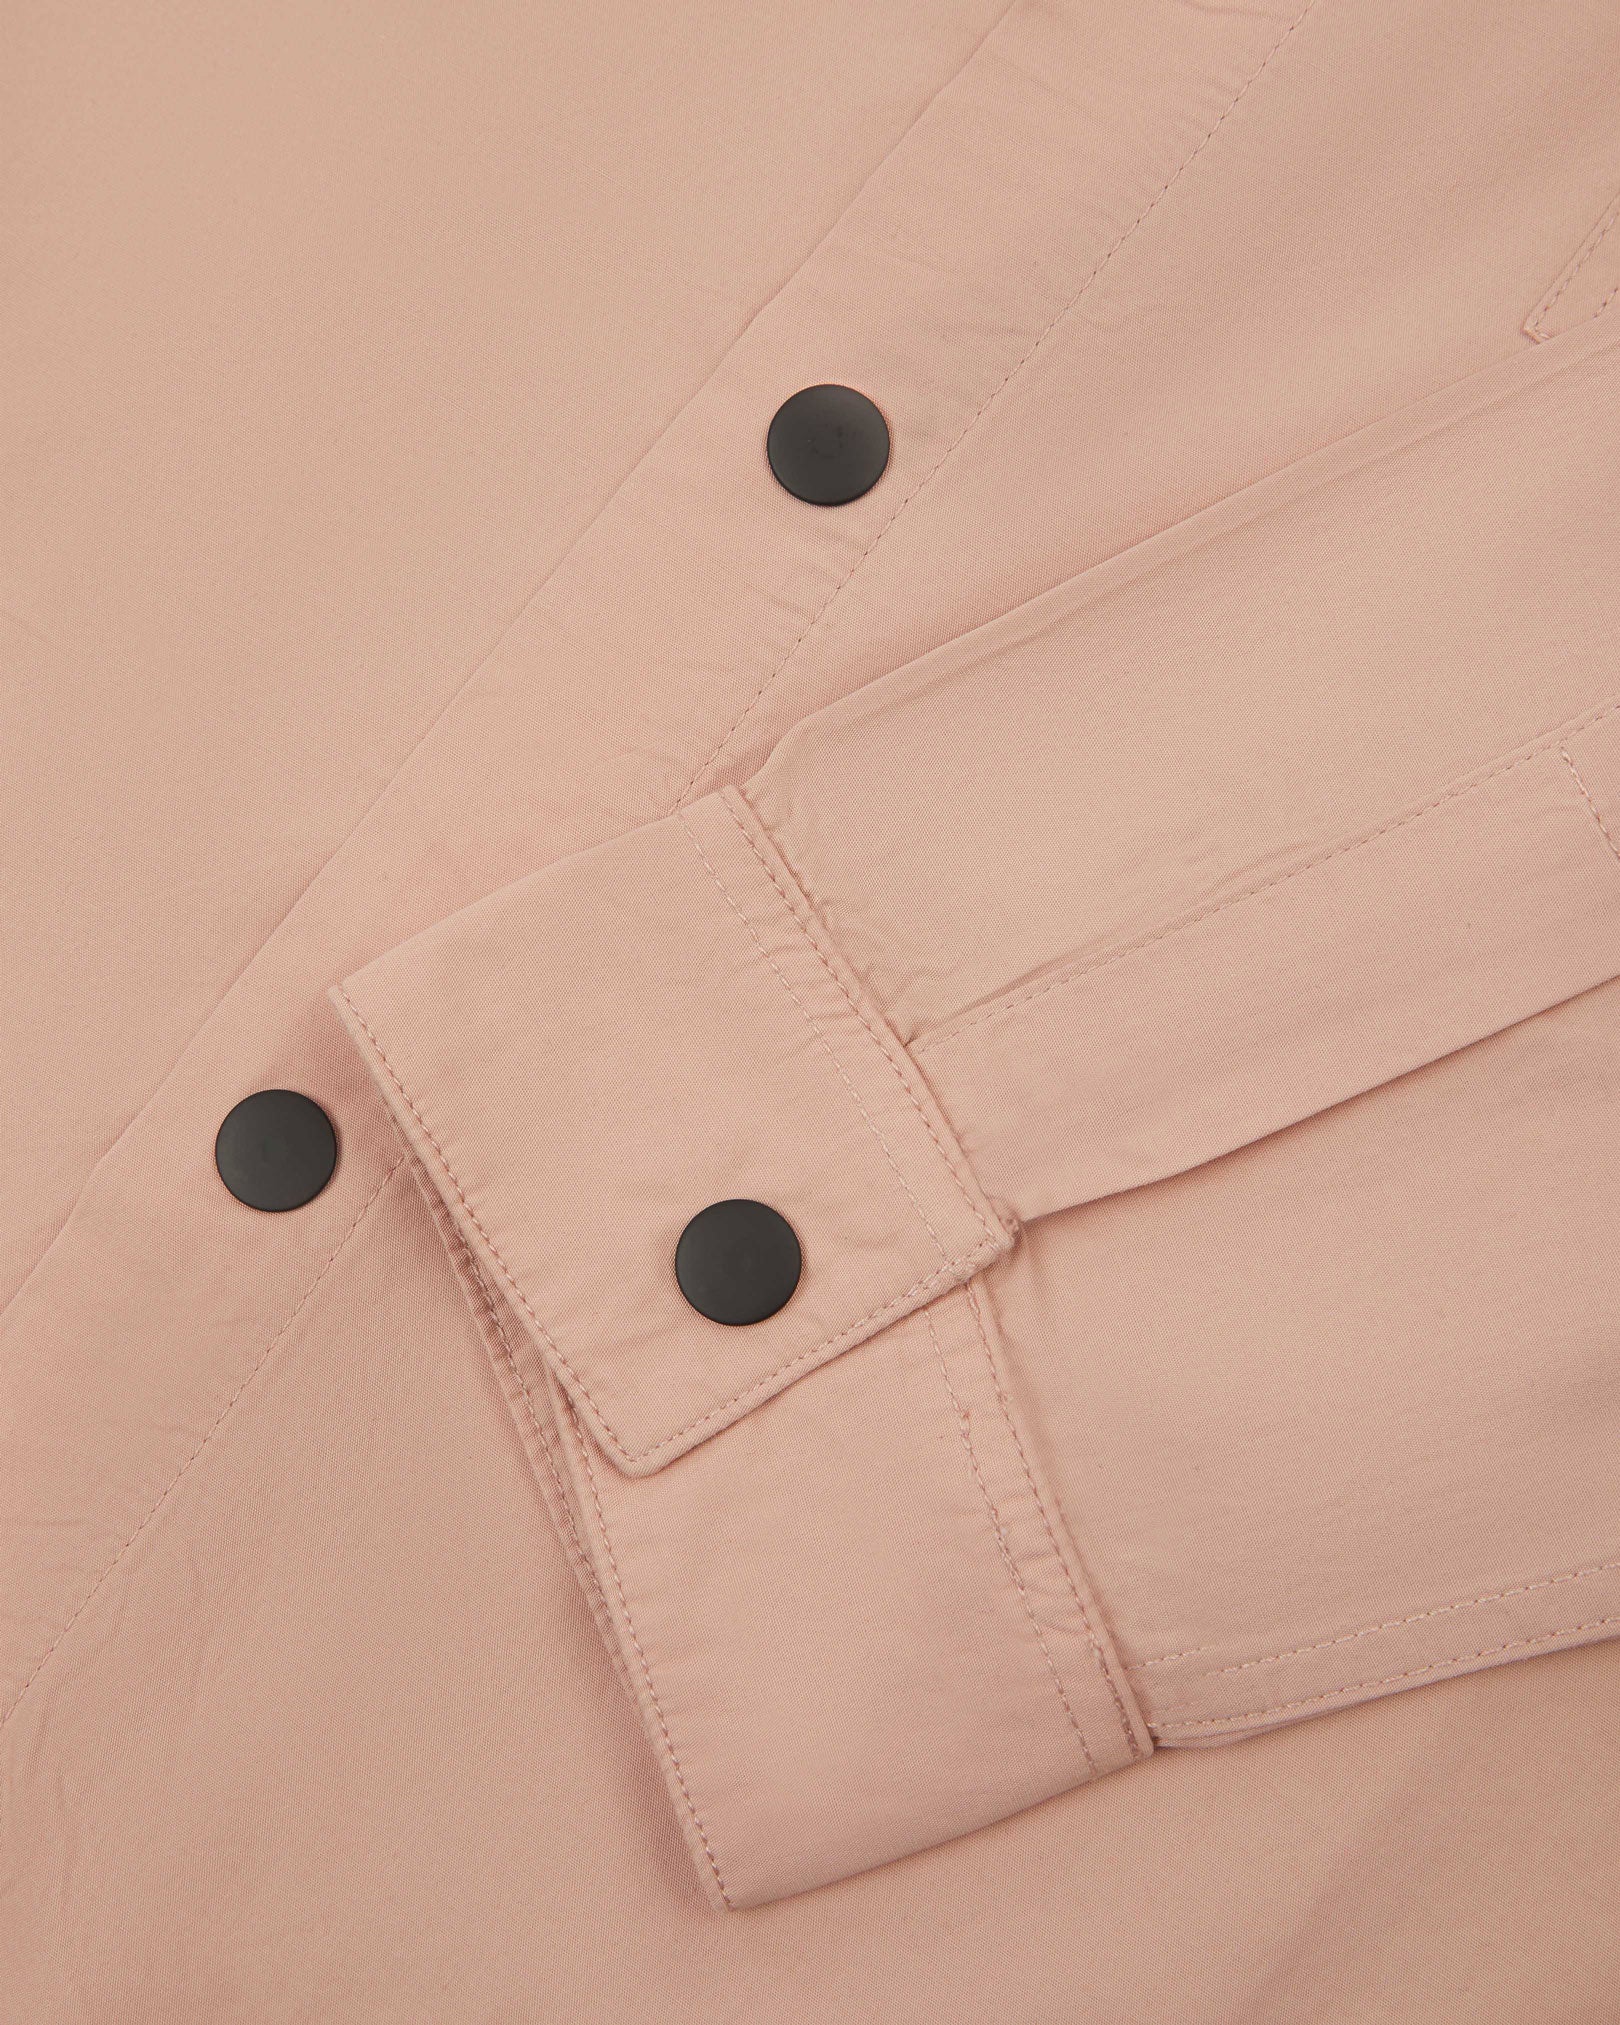 View of the mid-section of the dusty pink 6001 lightweight overshirt from Uskees, with focus on the popper buttons and reinforced cuff, placket and sleeve.